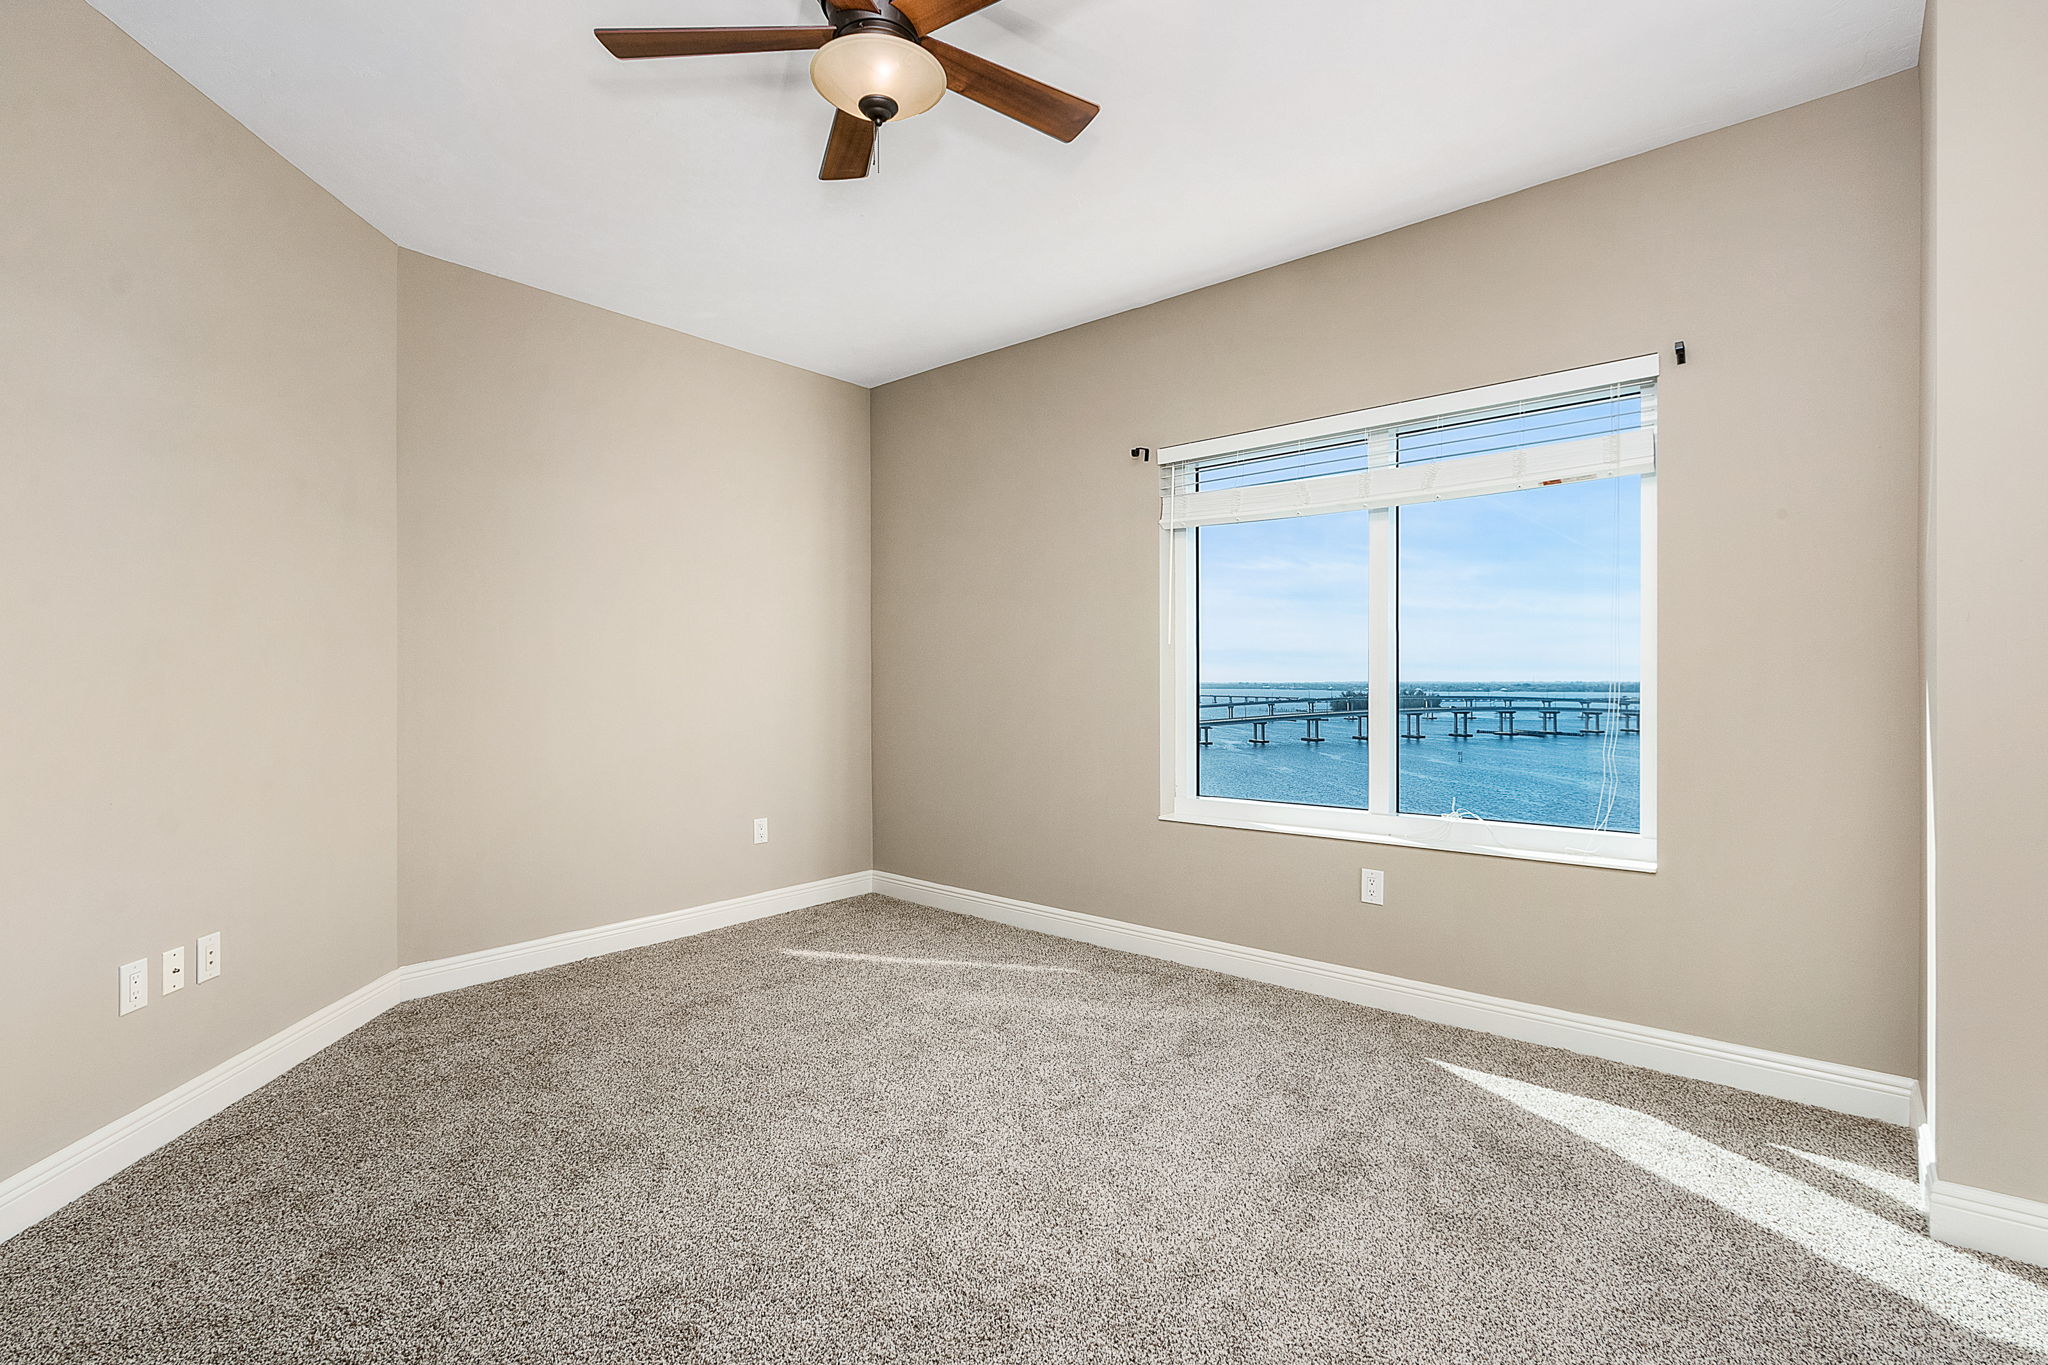  2745 First St Unit 1301, Fort Myers, FL 33916, US Photo 15